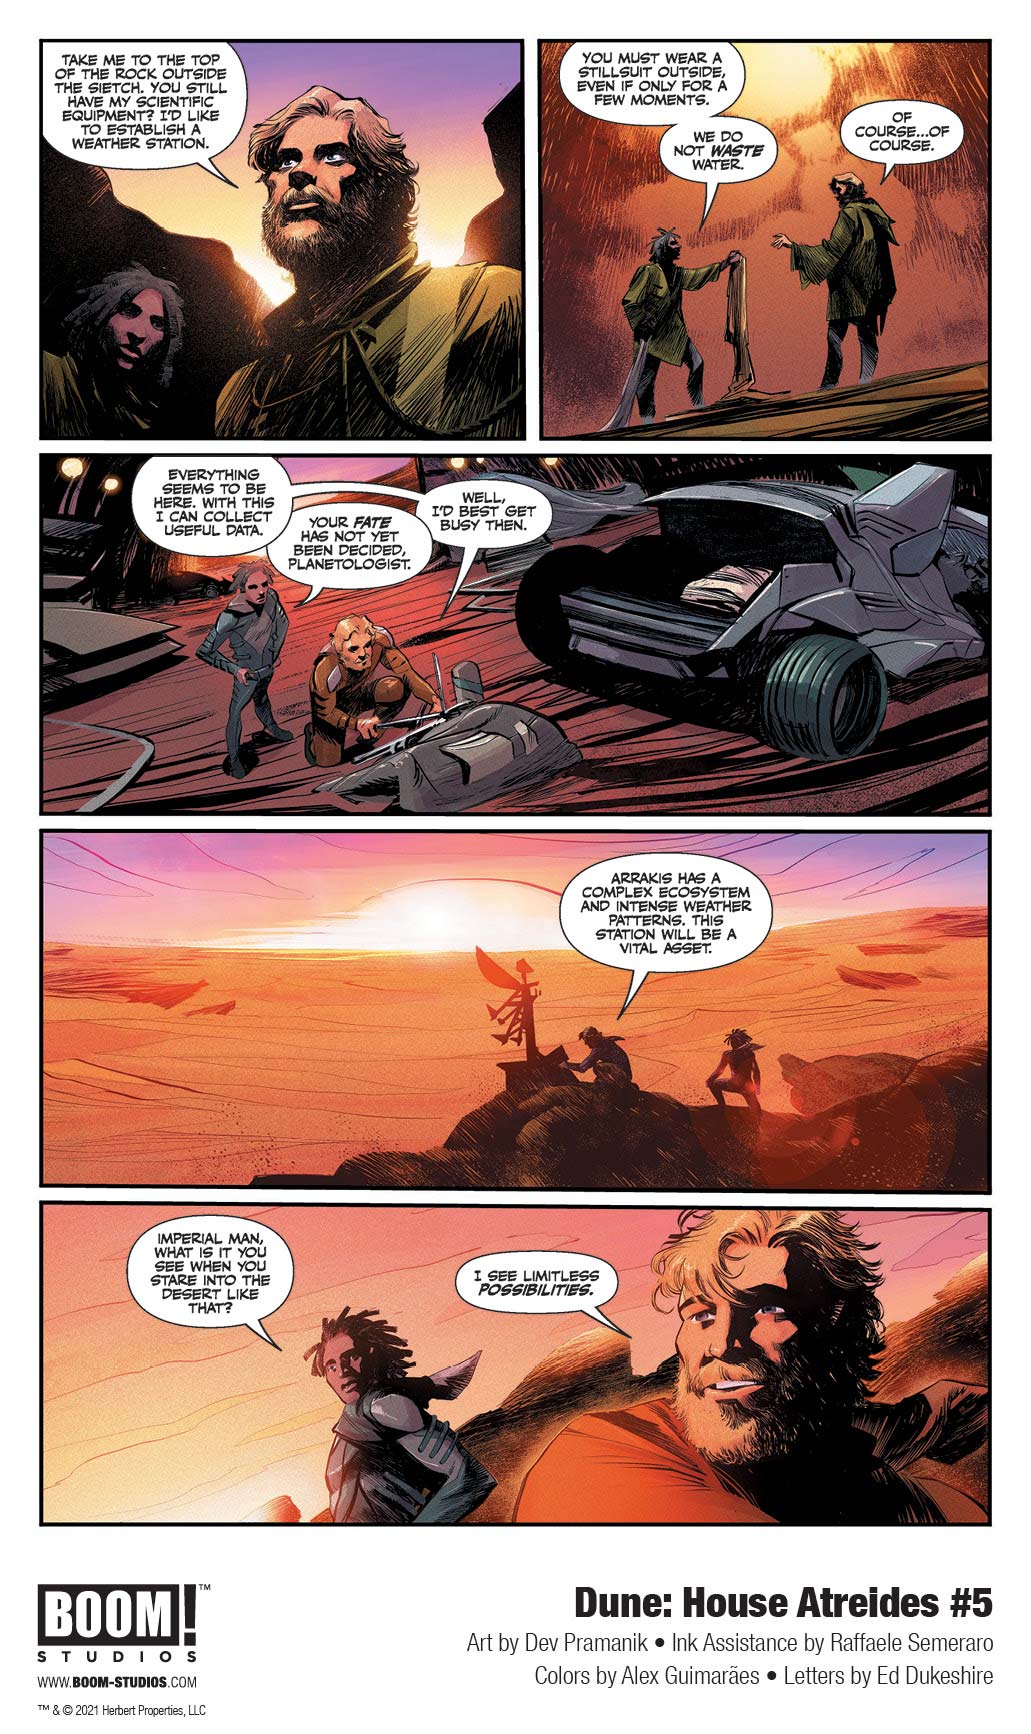 Dune: House Atreides comic series. Issue #5, preview page 4.